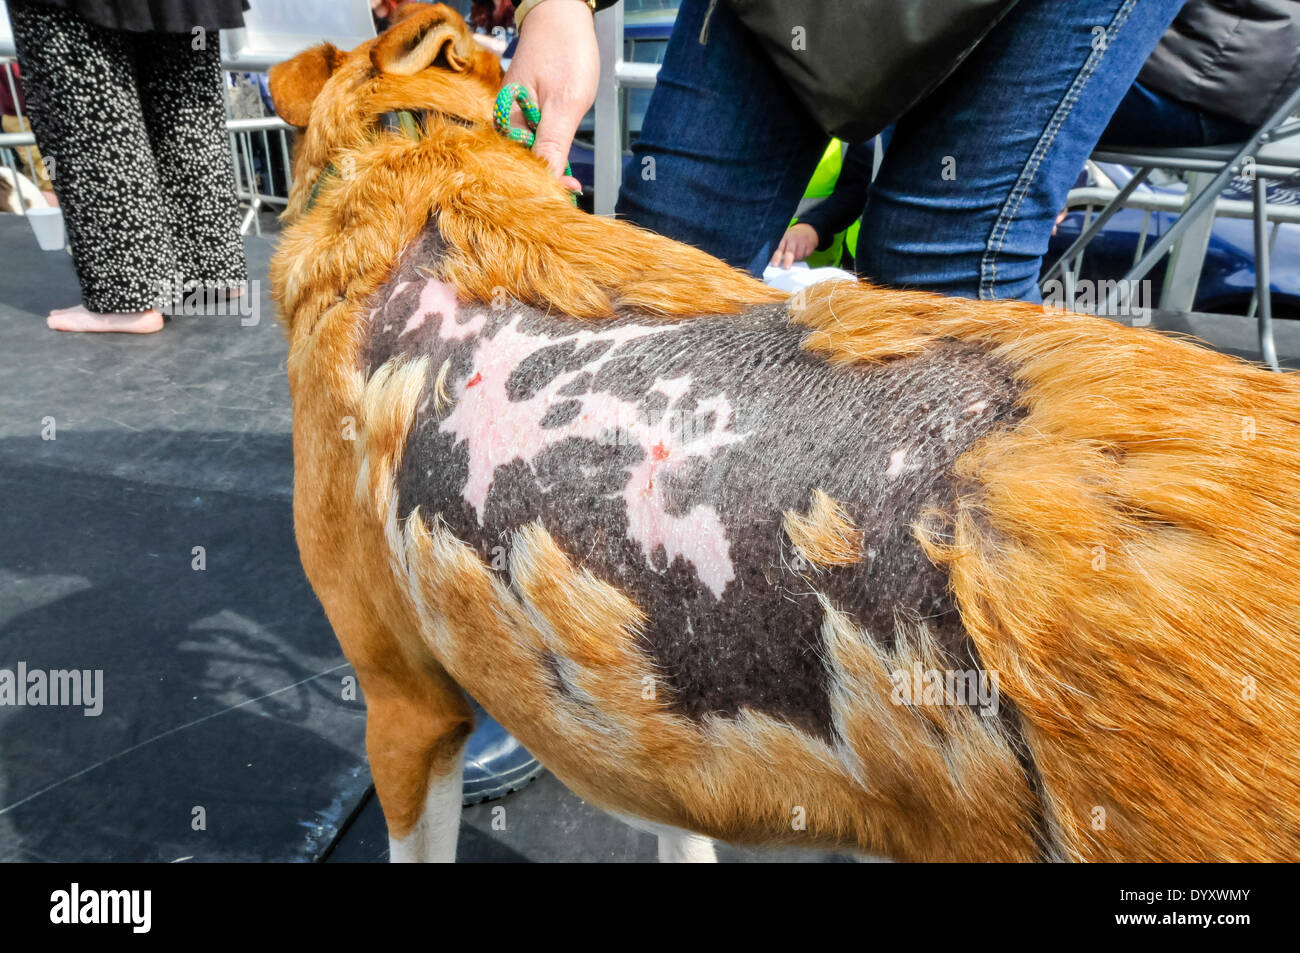 Belfast, Northern Ireland. 27 Apr 2014 - Large scars on a dog which is recovering from horrific abuse Credit:  Stephen Barnes/Alamy Live News Stock Photo